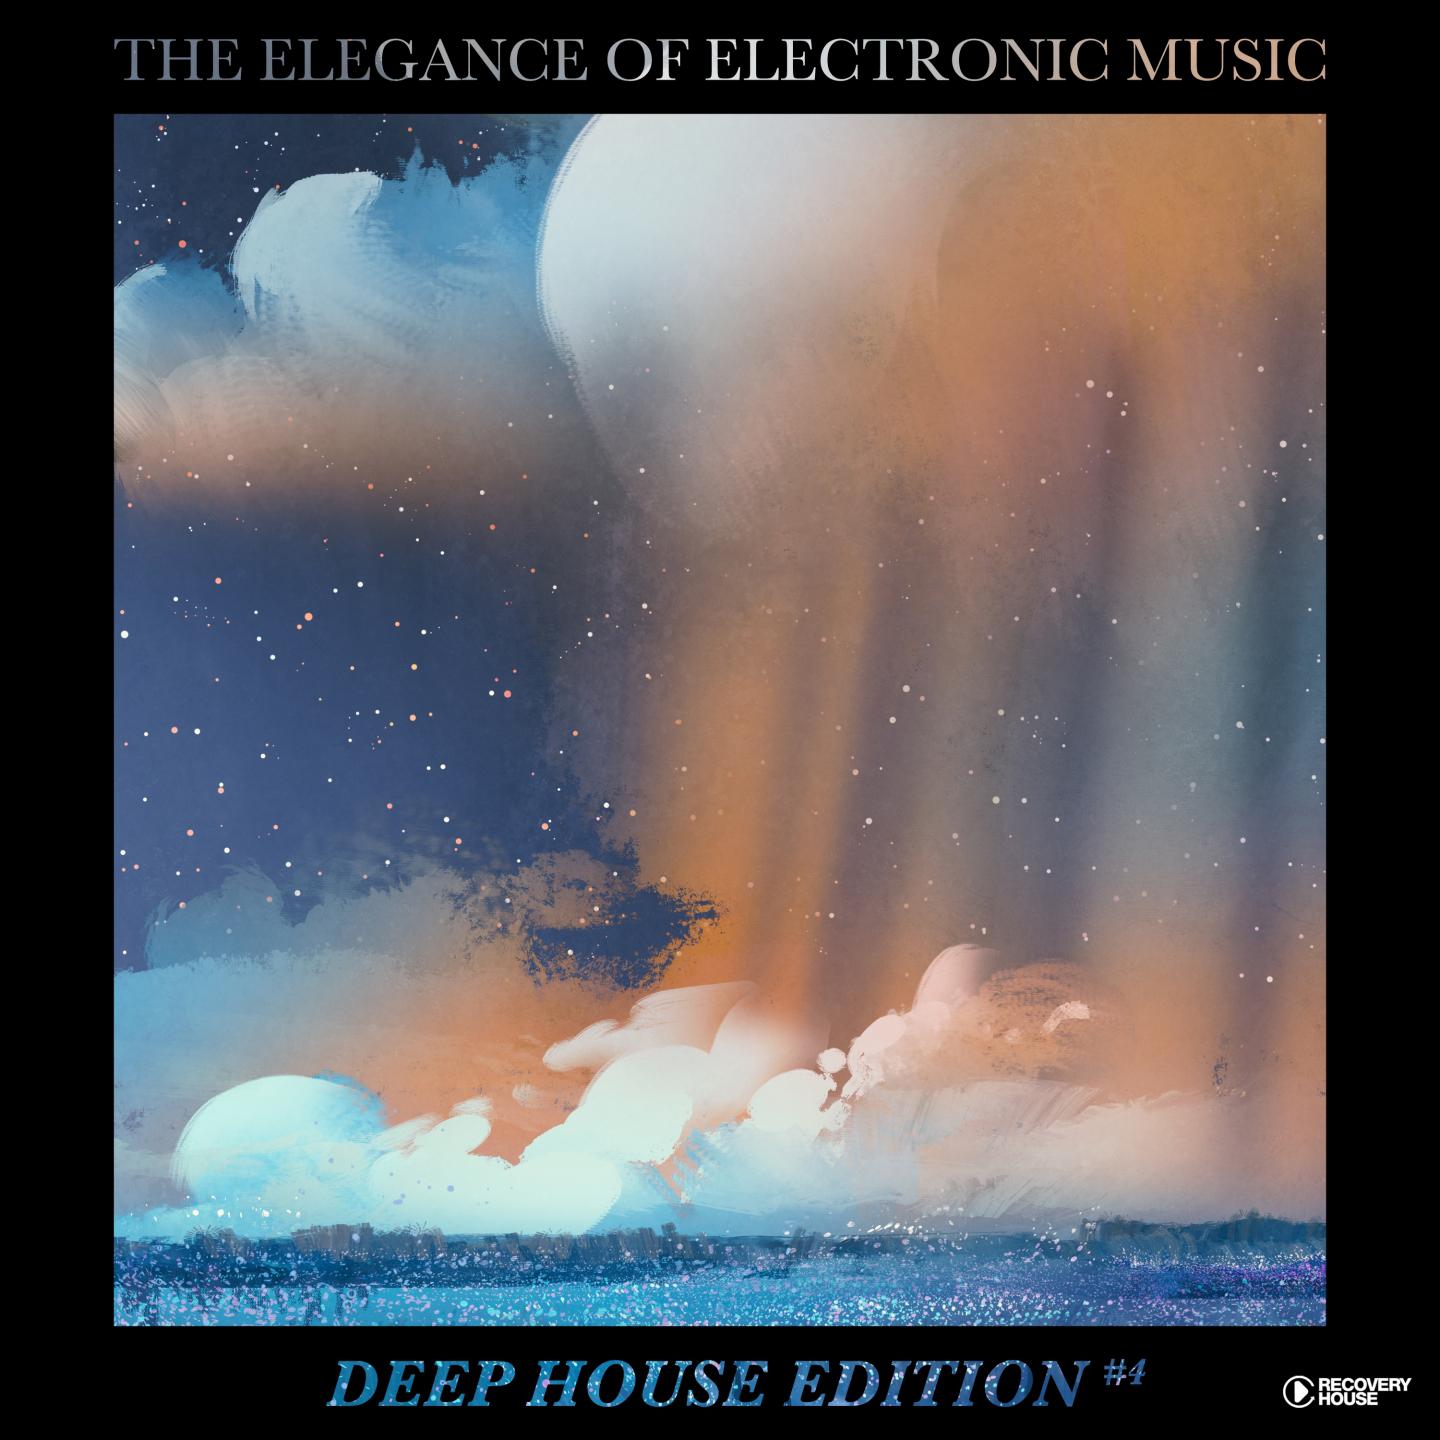 The Elegance of Electronic Music - Deep House Edition #4